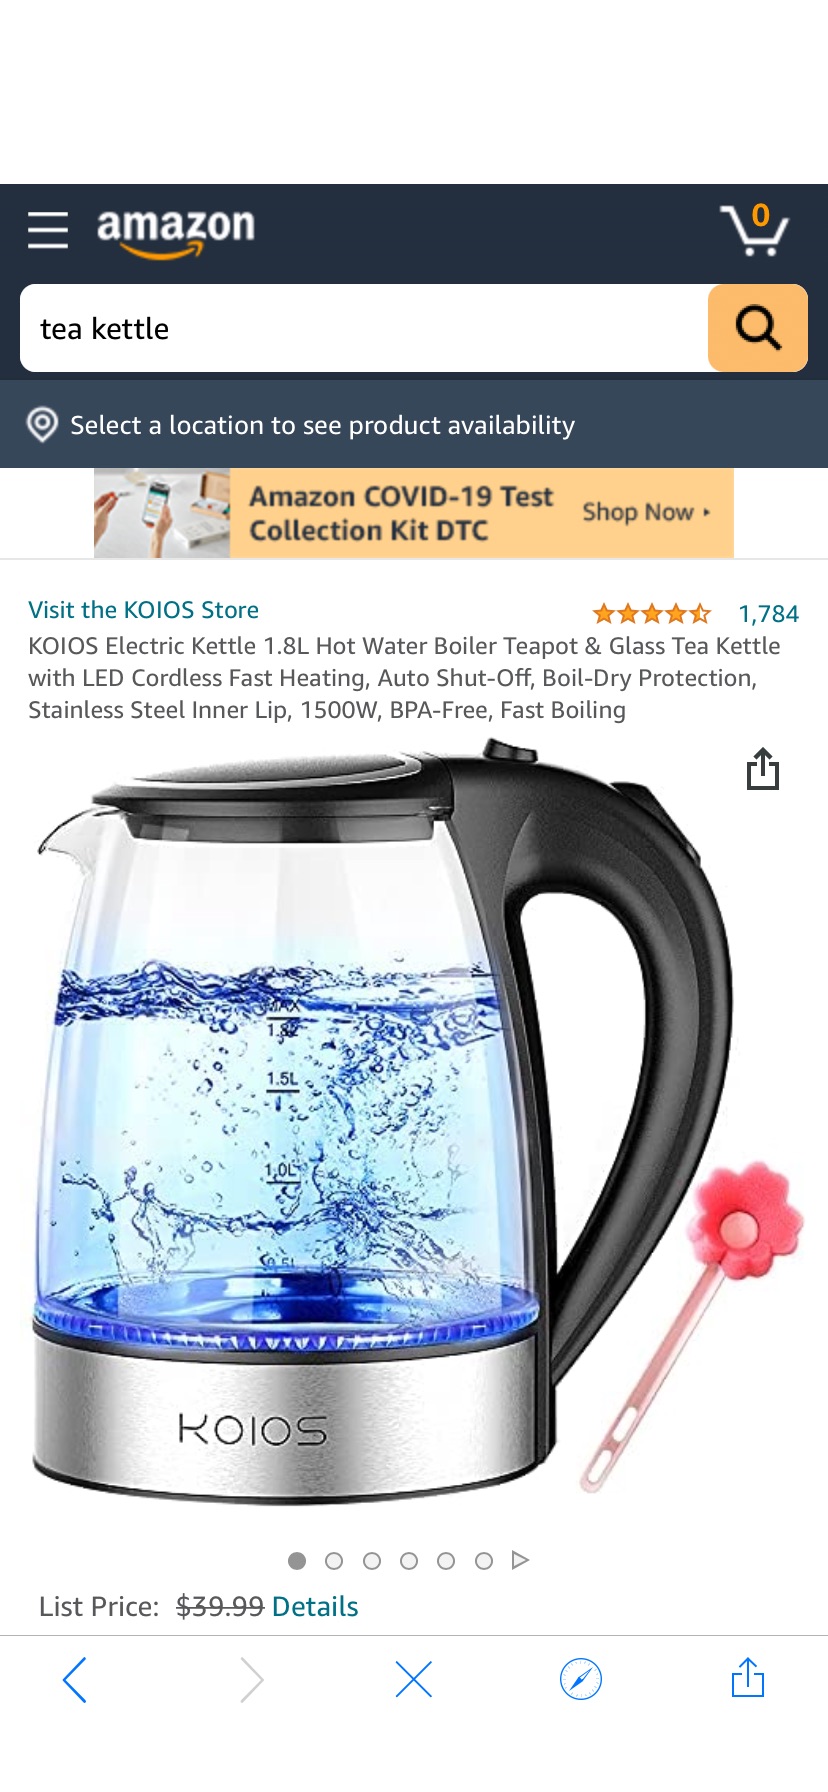 Amazon.com: KOIOS Electric 茶壶Kettle 1.8L Hot Water Boiler Teapot & Glass Tea Kettle with LED Cordless Fast Heating, Auto Shut-Off, Boil-Dry Protection, Stainless Steel Inner